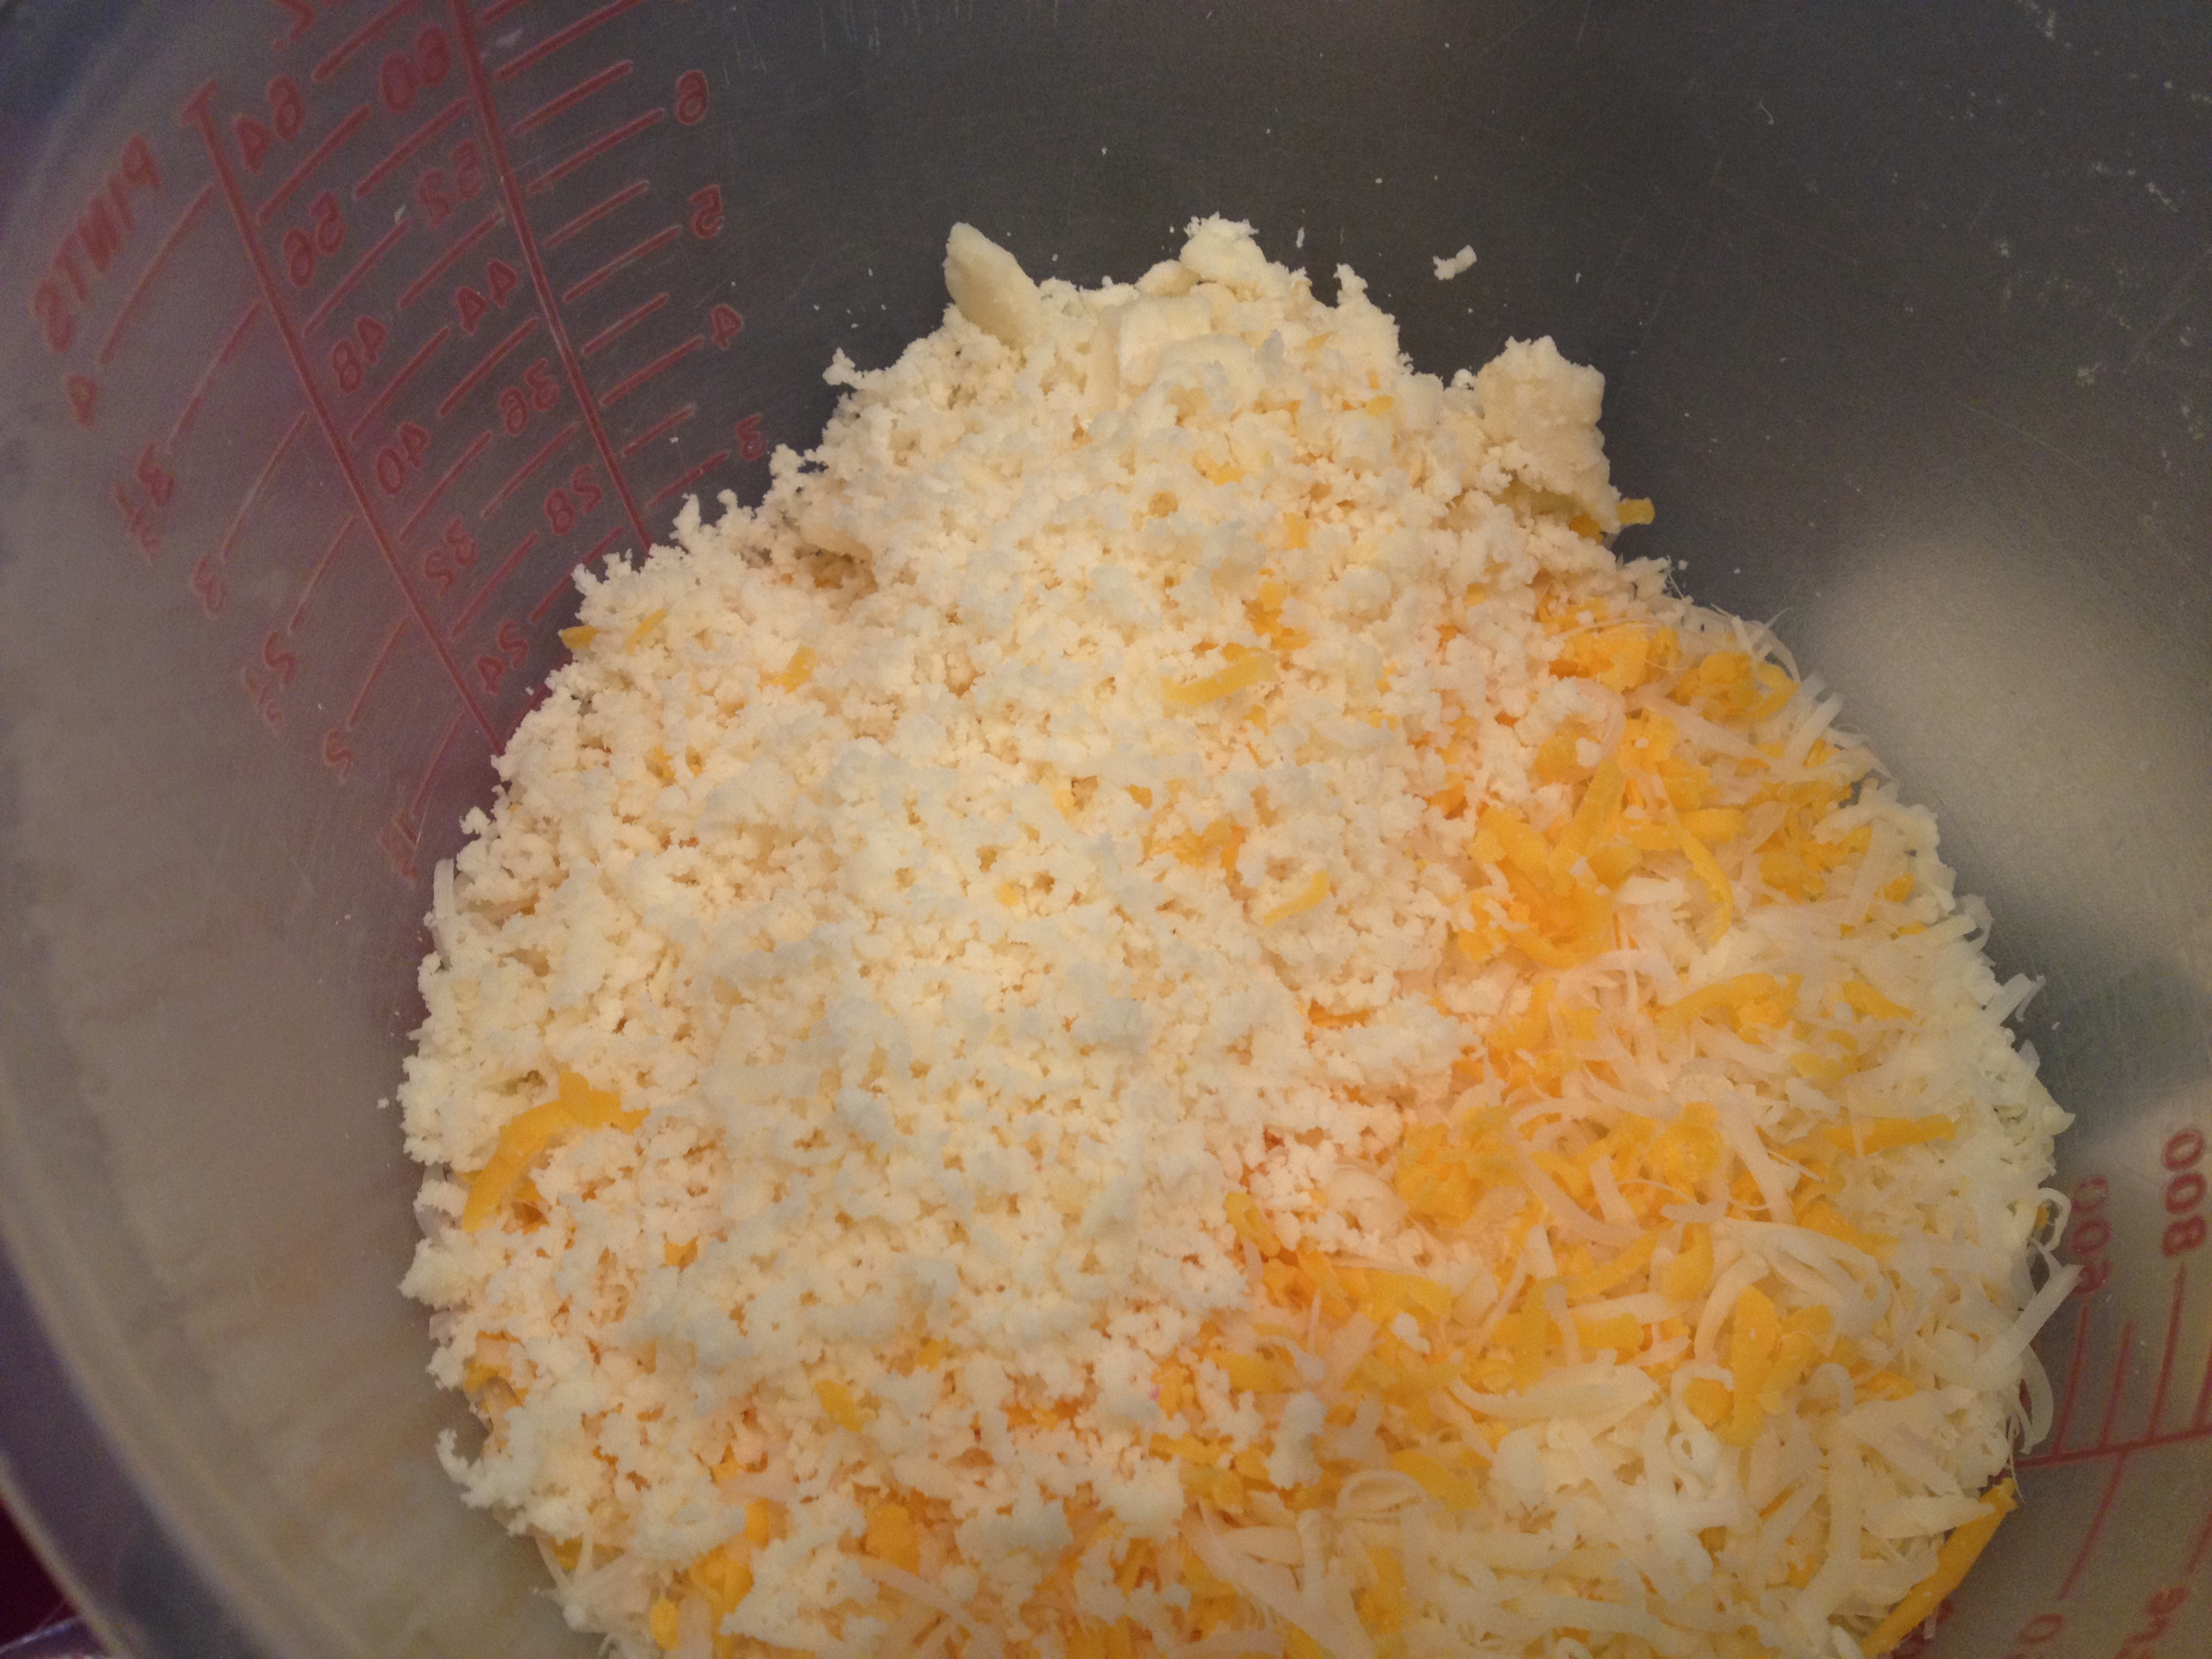 Mounds of cheese!